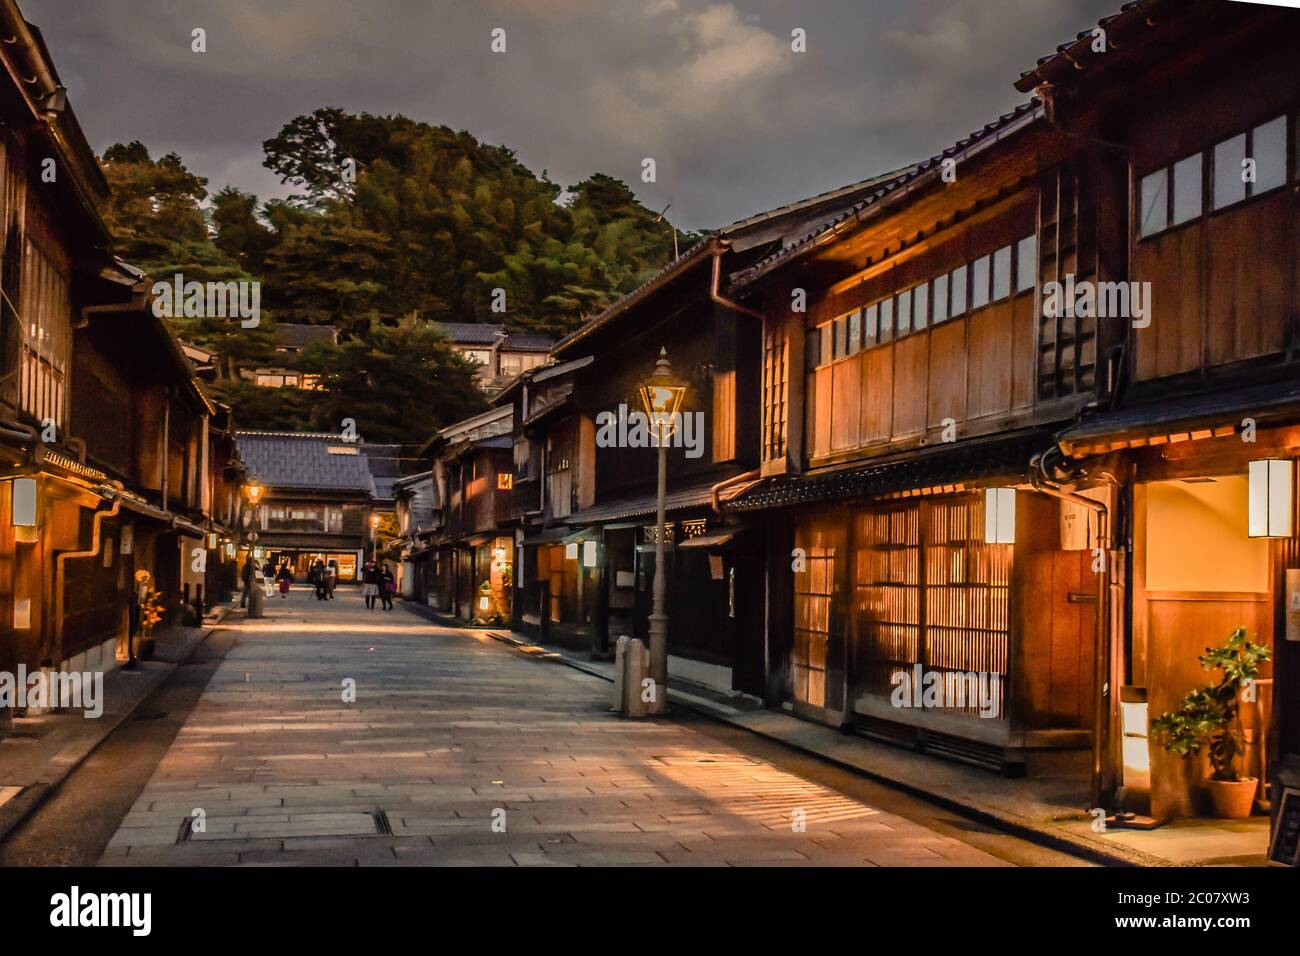 Traditional geisha quarter with old wooden houses in Kanazawa Japan during twilight Stock Photo